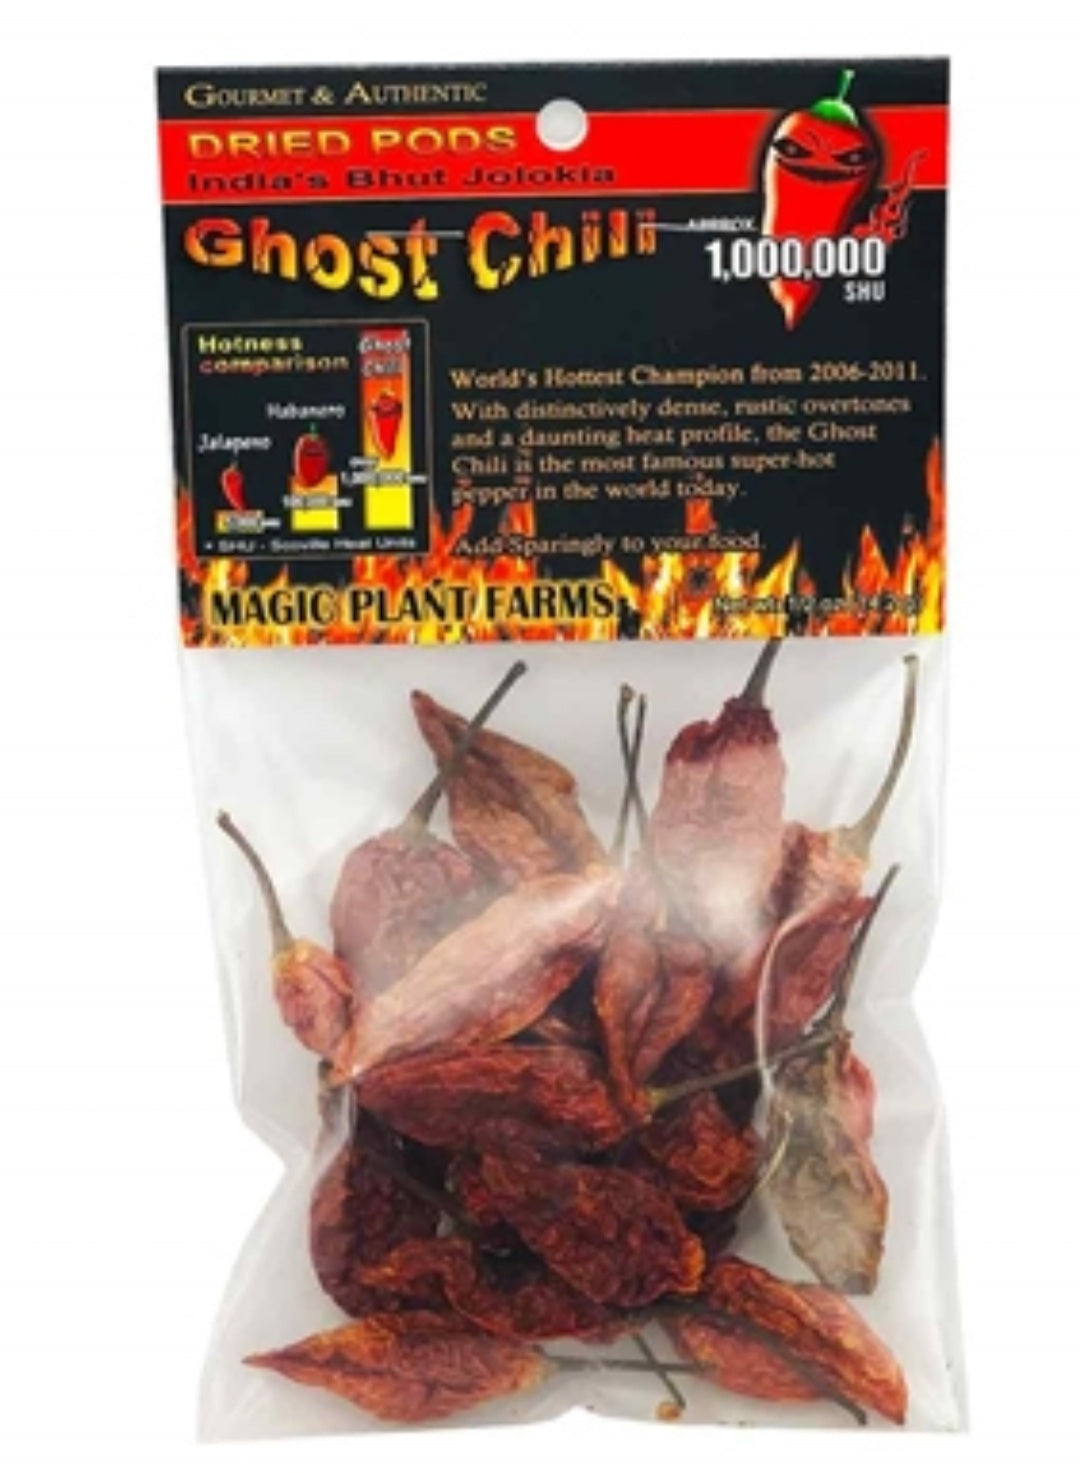 Dried Ghost chili pods